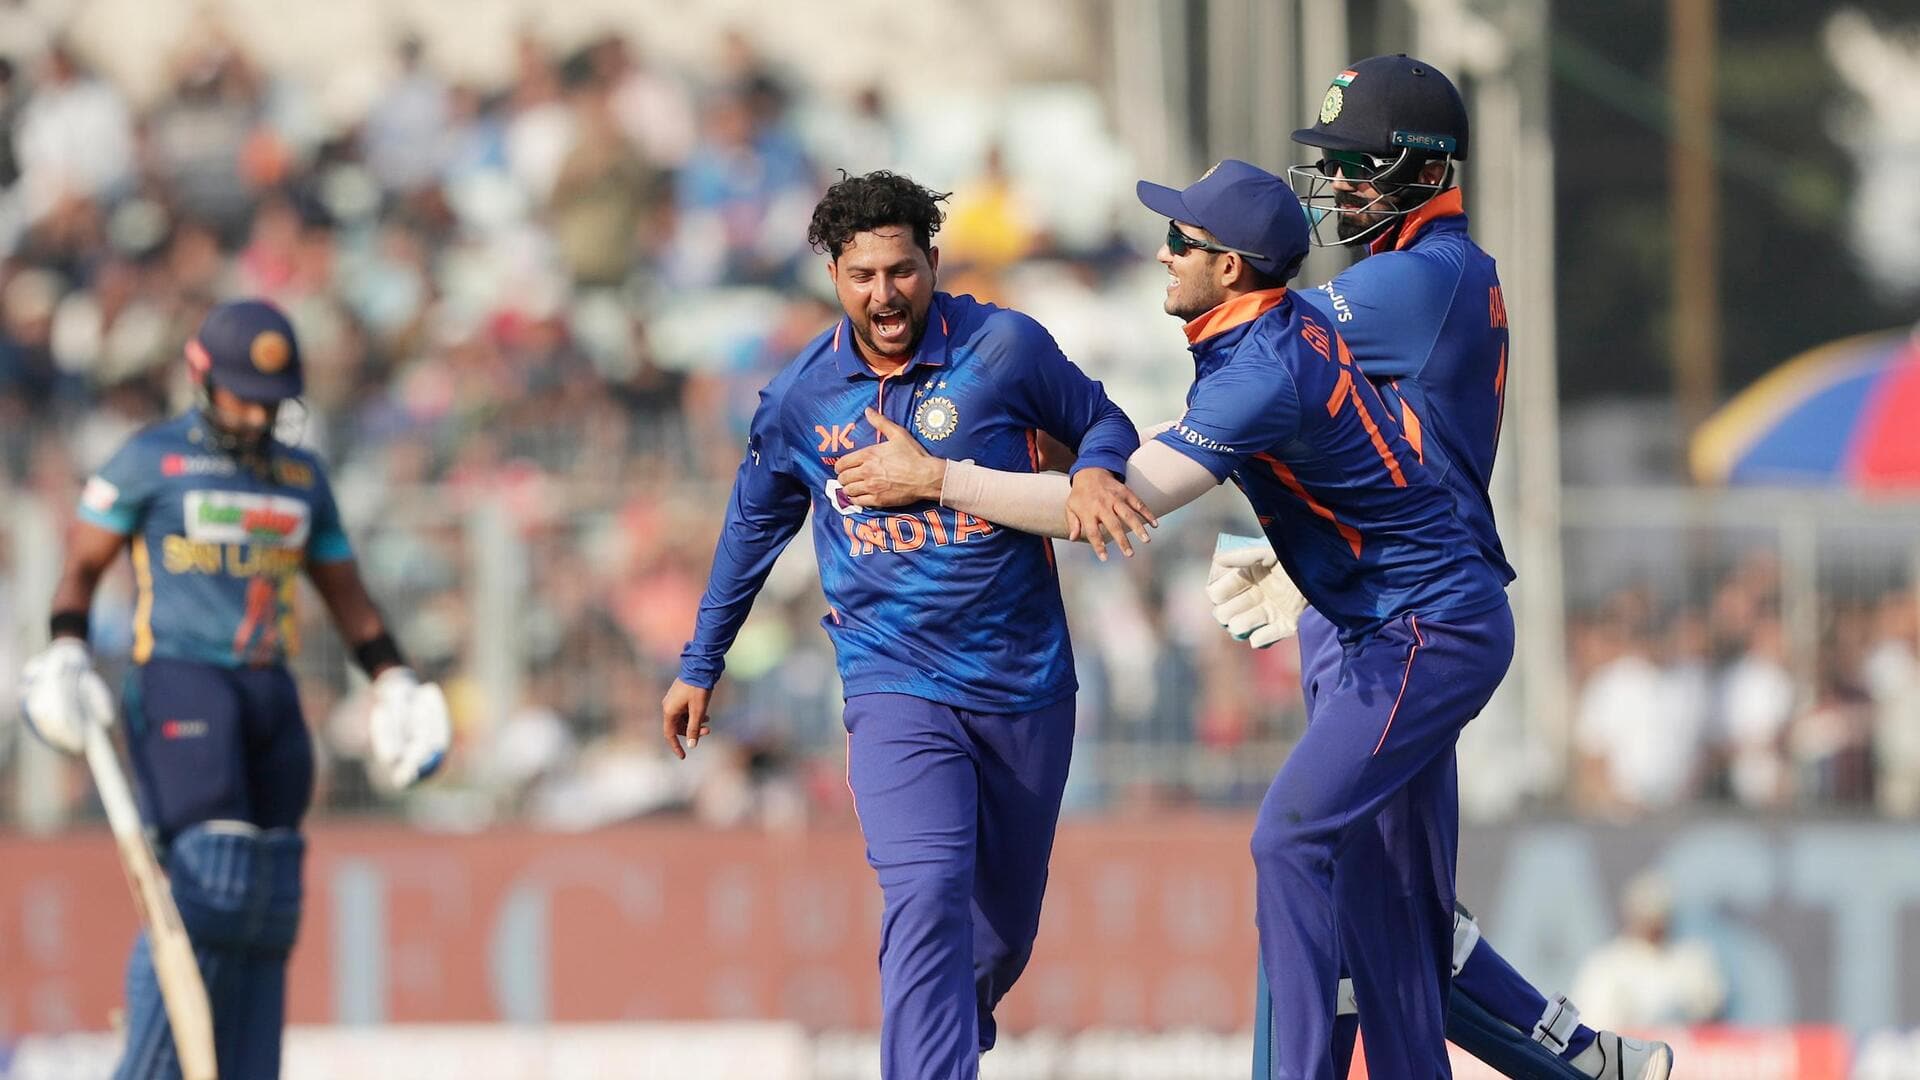 Kuldeep Yadav averages 13.81 in T20Is (bowling): Decoding his stats